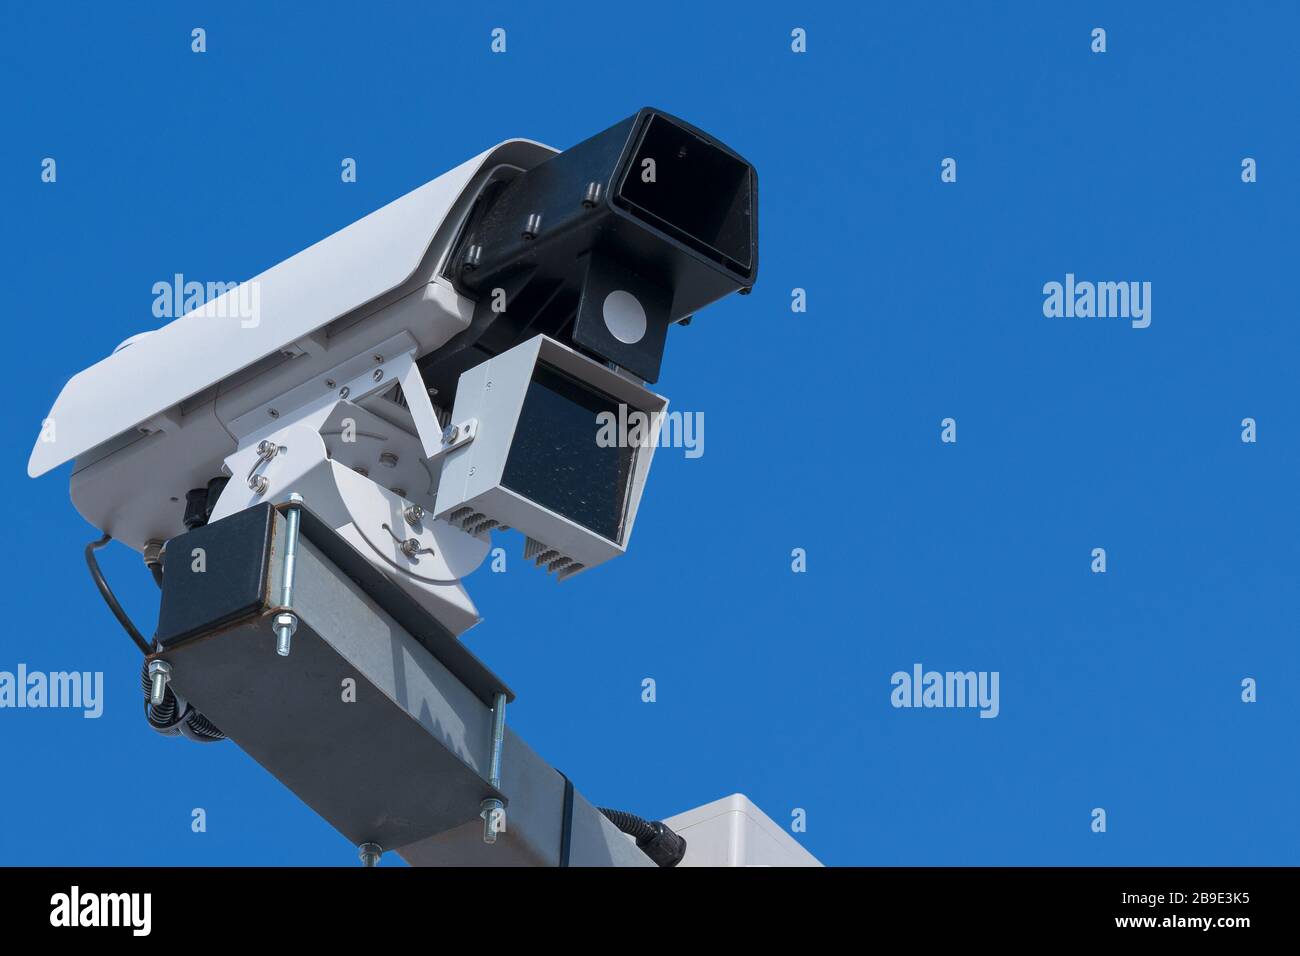 Isolated speed control camera with a radar, close-up, blue sky background, front view, free space for text. Stock Photo